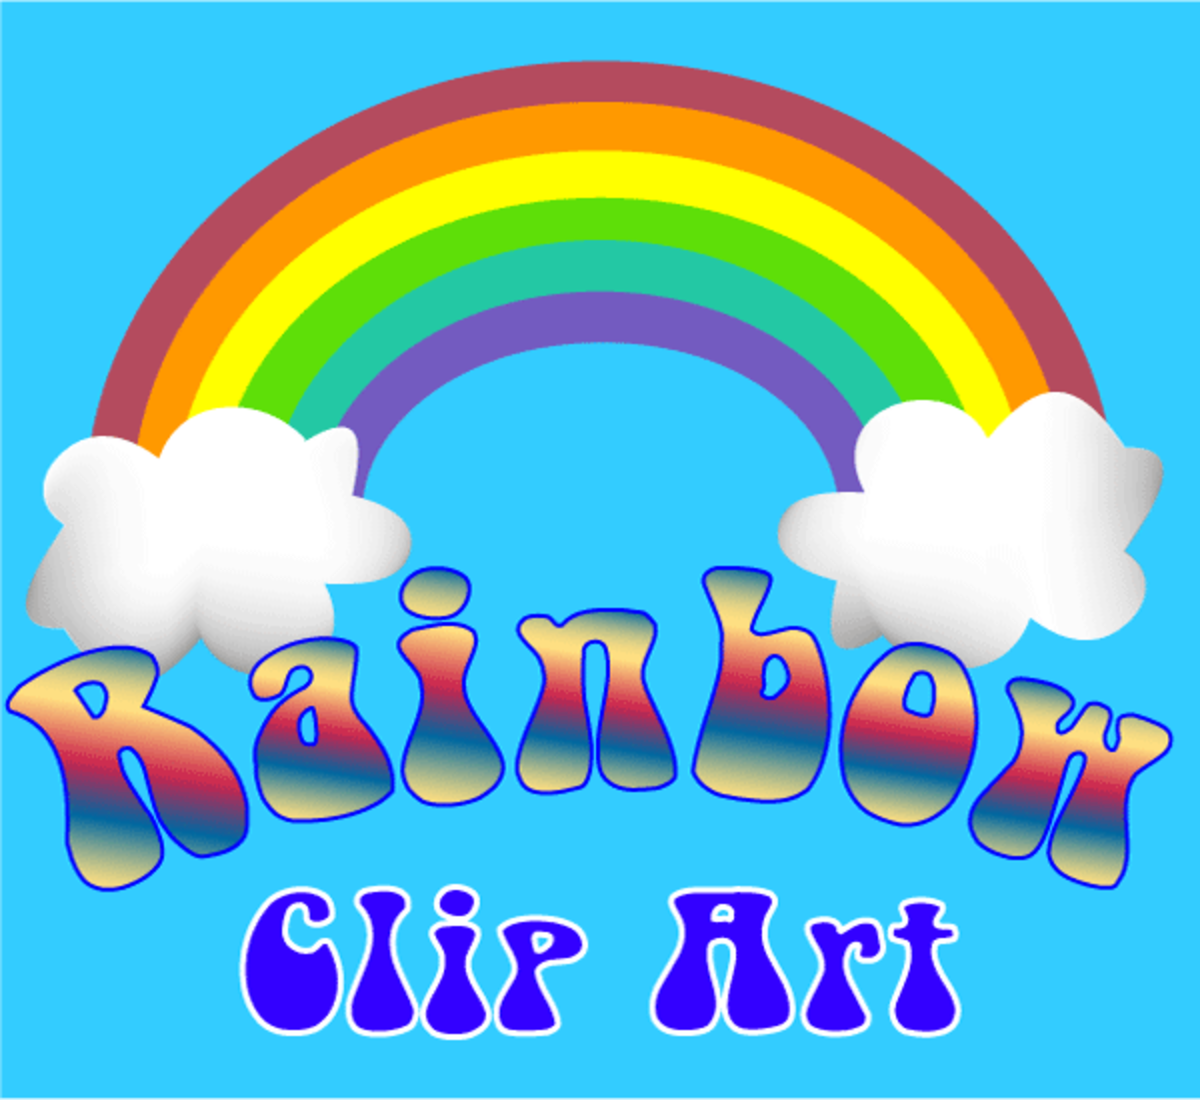 Rainbow clip art for arts and crafts